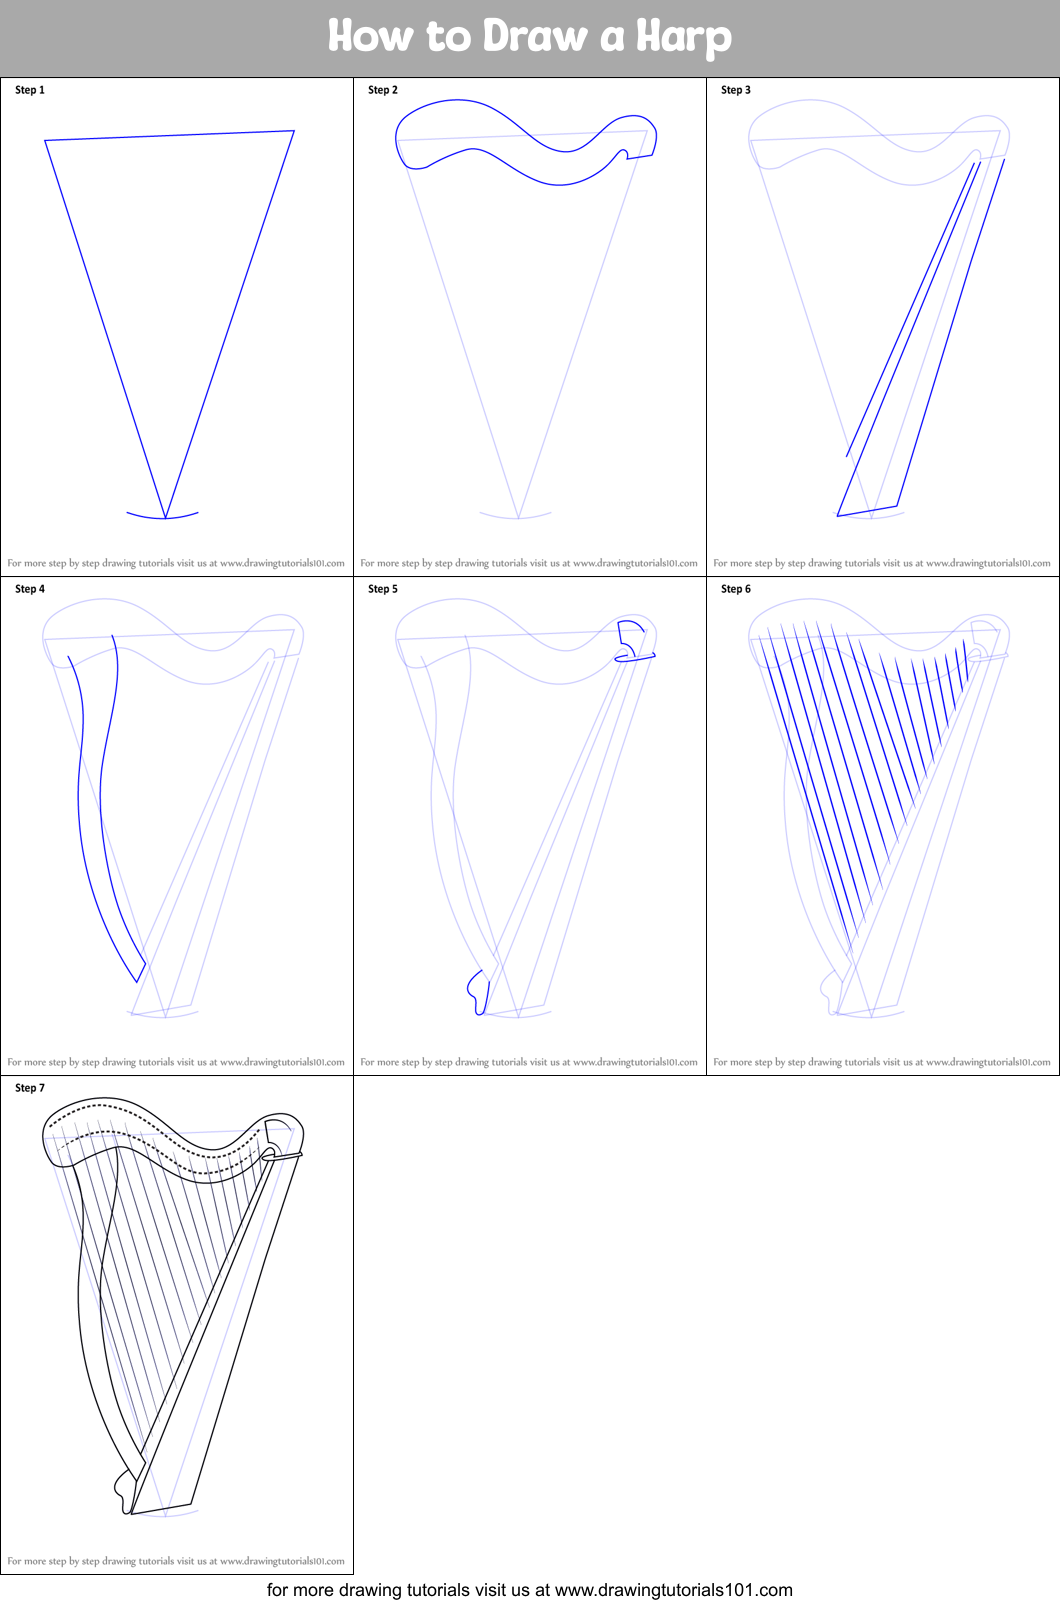 How to Draw a Harp printable step by step drawing sheet